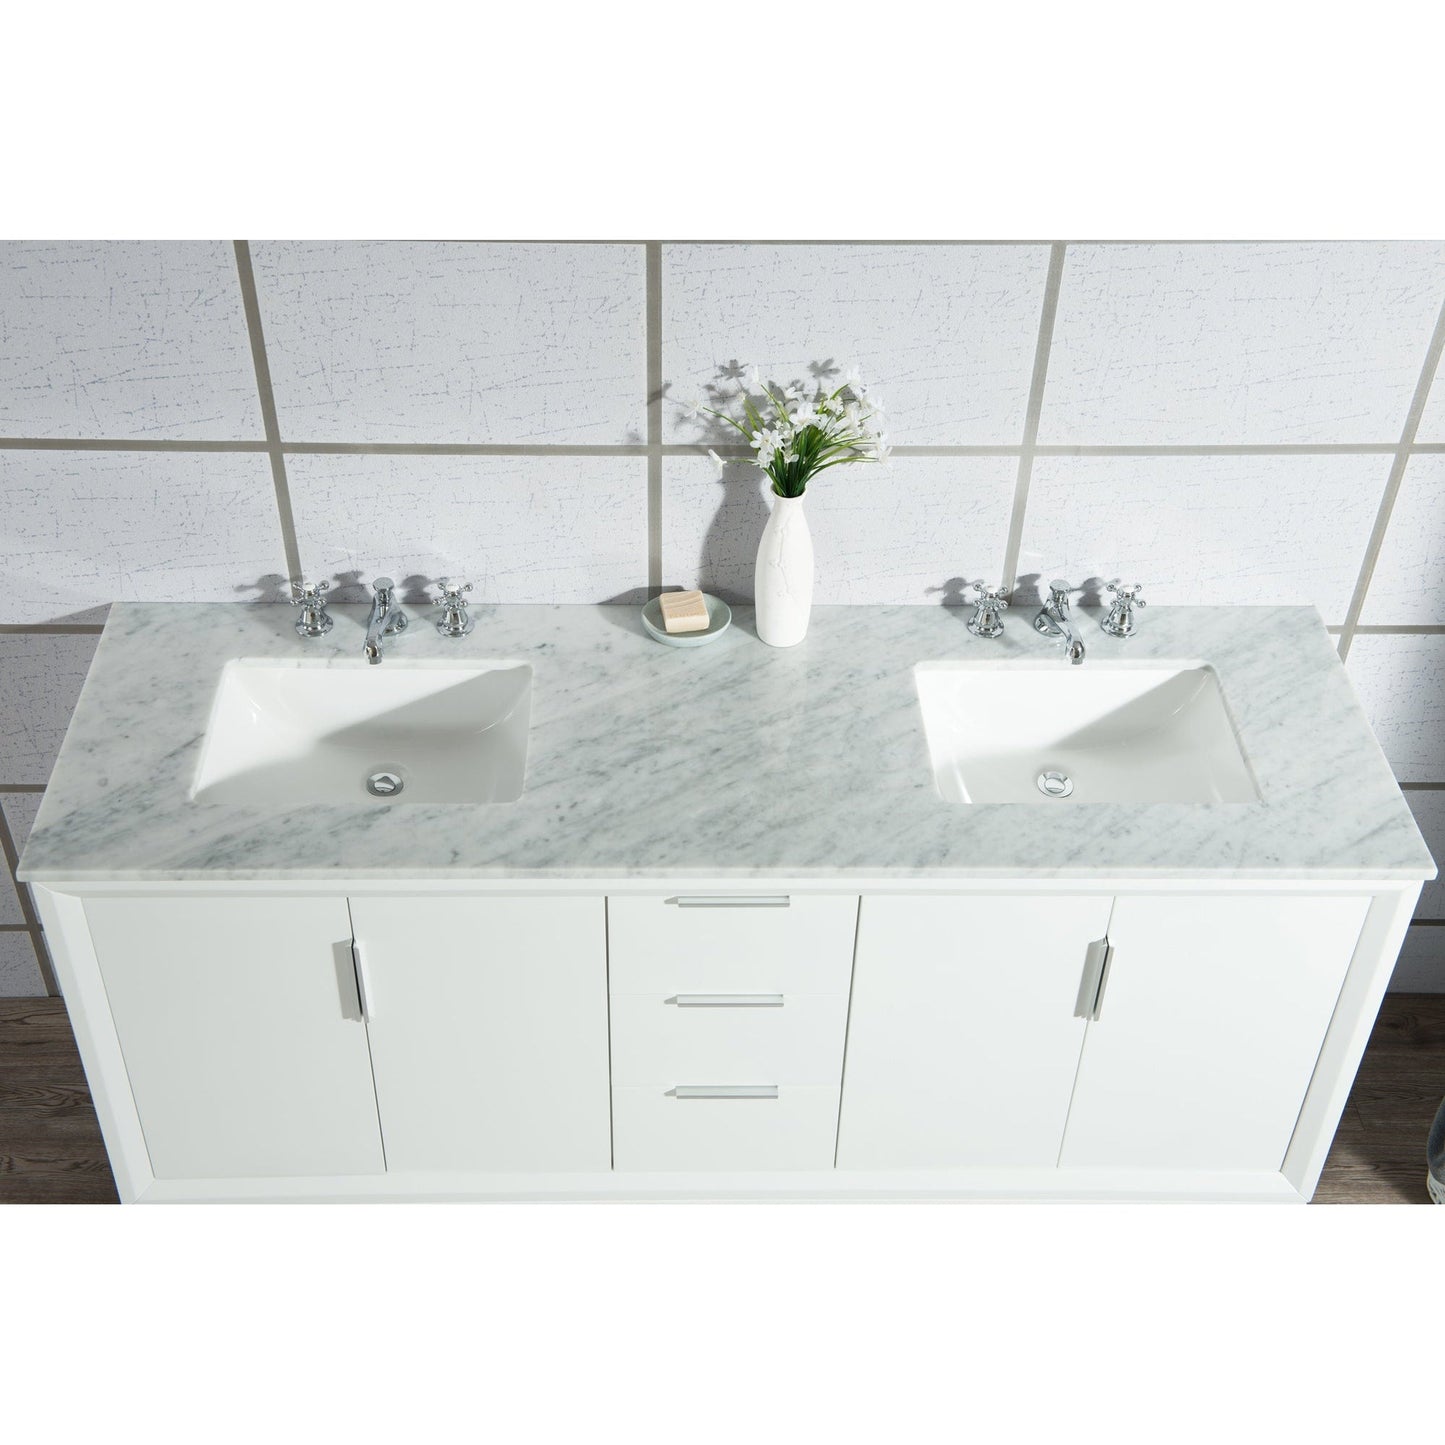 Water Creation Elizabeth 72" Double Sink Carrara White Marble Vanity In Pure White With Matching Mirror and F2-0009-01-BX Lavatory Faucet